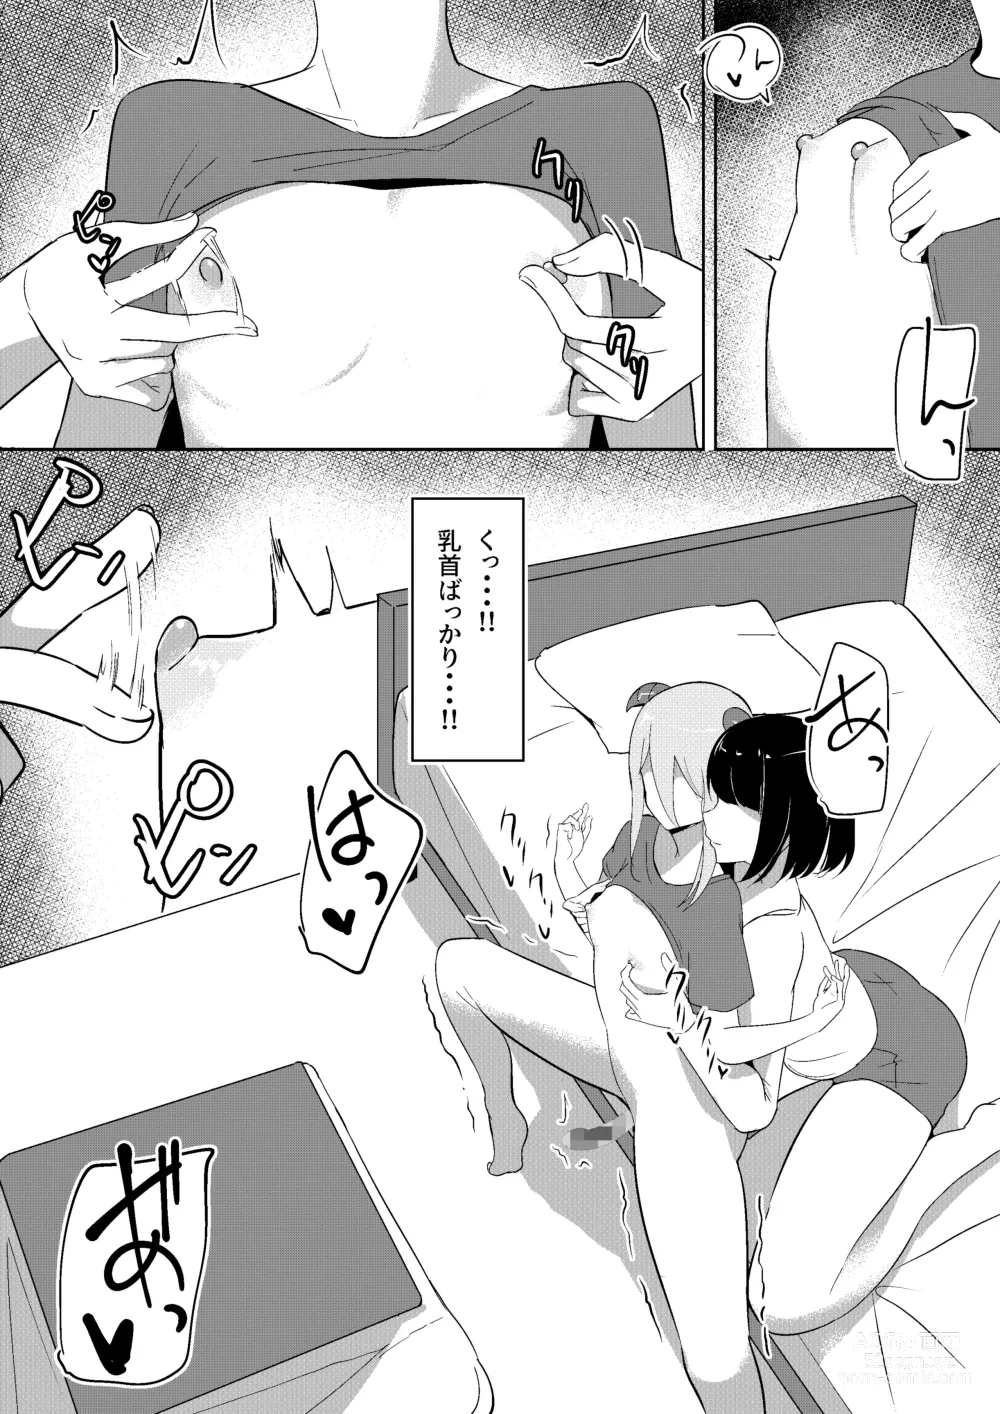 Page 16 of doujinshi Succubus Lily 2